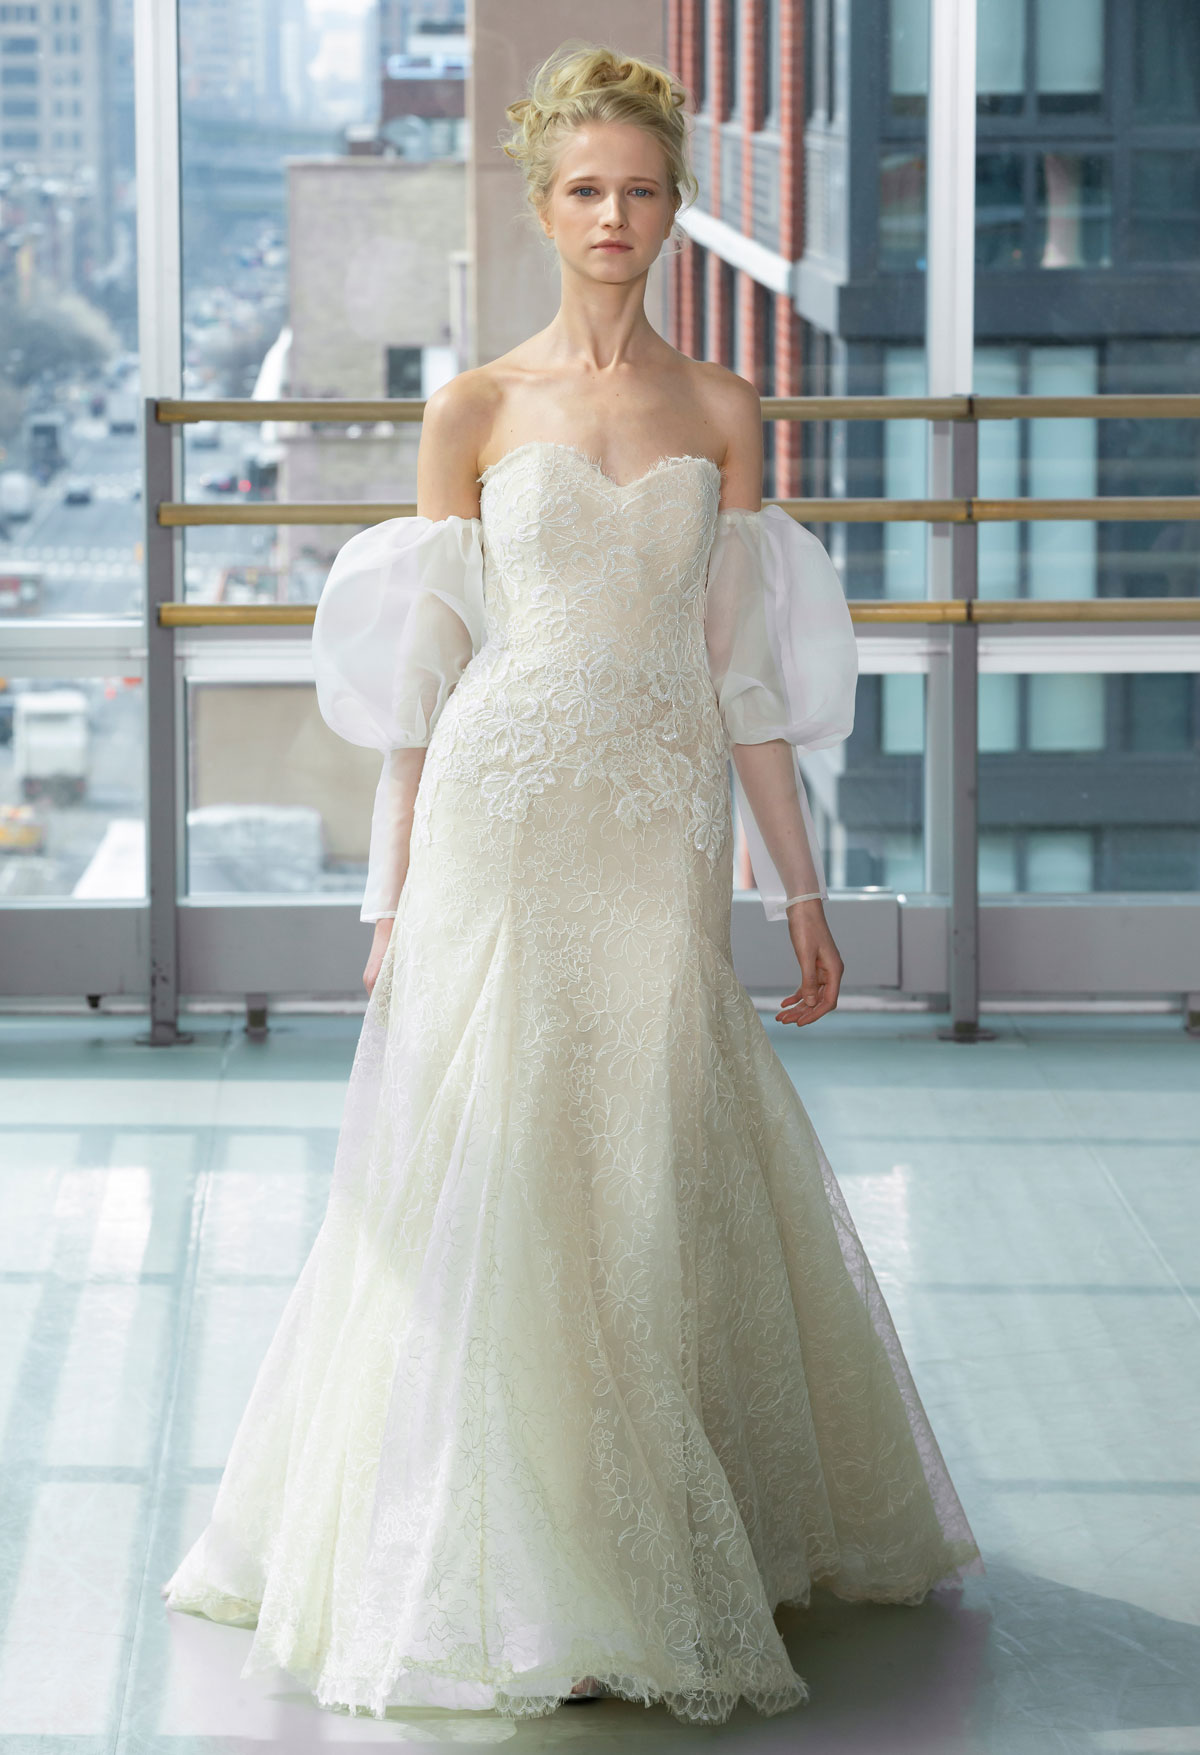 Wedding Dress Trends for Spring 2019 | JLM Couture